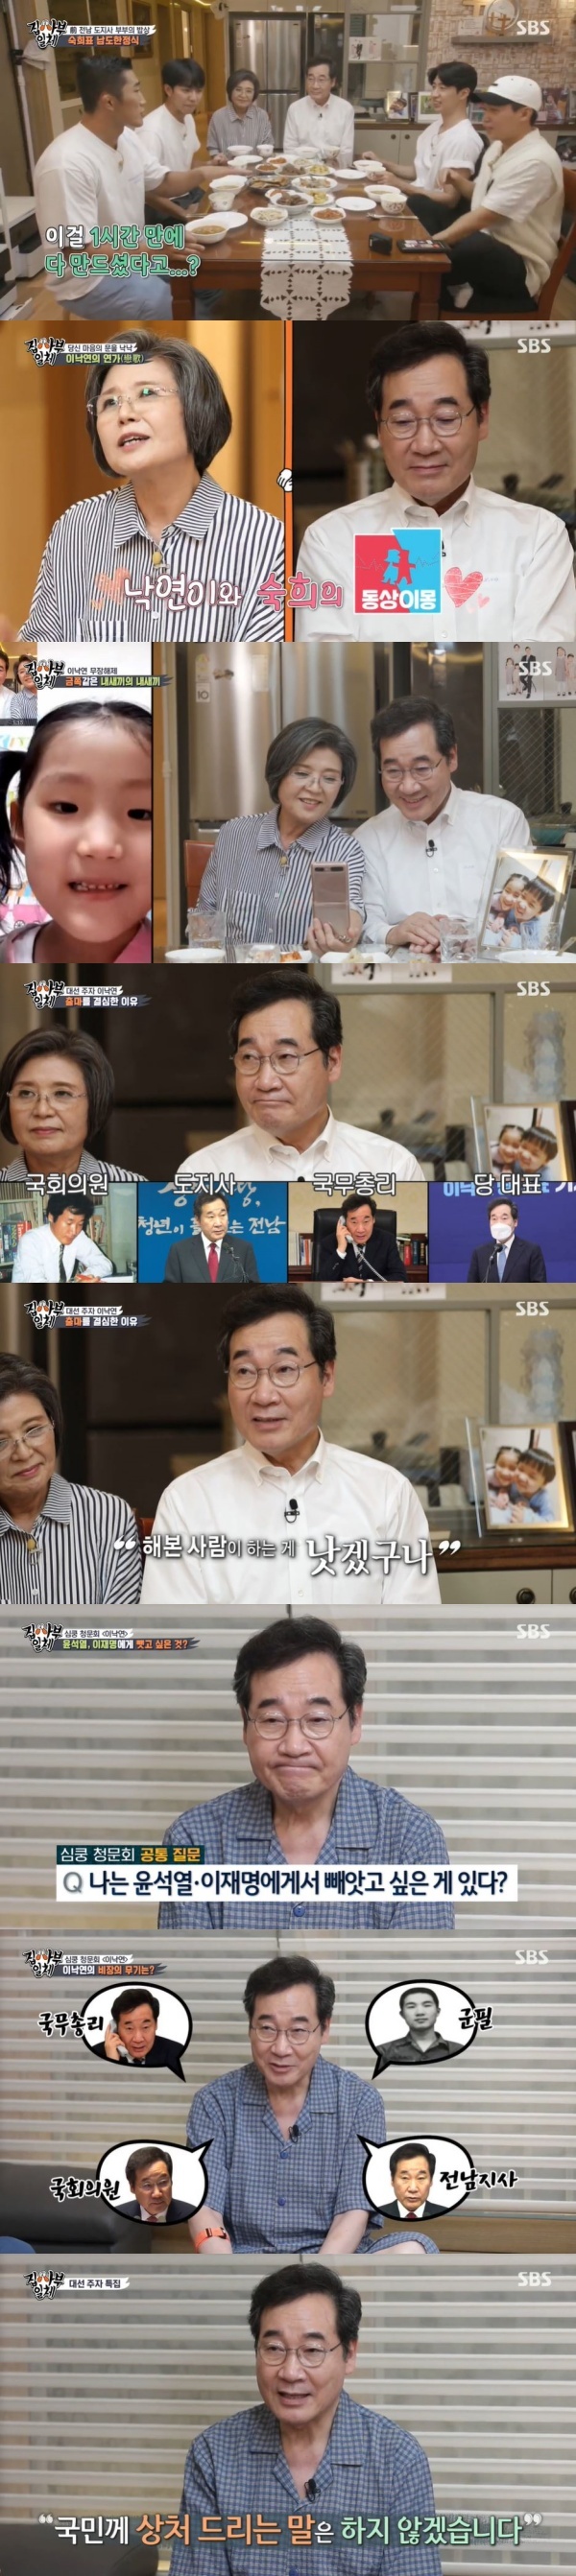 In the SBS entertainment program All The Butlers, which aired on the 3rd, Lee Nak-yeon, who appeared in the presidential candidate BIG 3 special feature and showed his desire for the president from the human side, was portrayed as the representative of the Democratic Party.Lee Nak-yeon, the last runner of the presidential election, appeared on the day.Lee Seung-gi reported that Lee Nak-yeon does not stand and move as it is in the nervous appearance of Lee.Yang Se-hyeong teased, Are you charging now? and laughed.Lees wife, Kim Sook-hee, Ada Lovelace, served the South Korean ceremony for the members.Lee Seung-gi and Yang Se-hyeong and Kim Dong-Hyun and Yoo Soo-bin admired Kim Ada Lovelaces South Korean Limited Ceremony.Kim Ada Lovelace said, There is a story in miso stew. Lee said, It was the first food my wife gave me.Kim Ada Lovelace mentioned her first meeting with Lee, saying, I met him as an matchmaker. A skinny man sat like a Sen, he recalled his first meeting with Lee.I was sitting for about 10 minutes and I said, Im going. It was rude, he said. I did not think that both would marriage with this person.I felt sorry for my rude behavior, Kim Ada Lovelace said. I called myself and asked for a call by 4 oclock. He added, I did not have a complete mind.I called like Carl at 4:00, and I got the character (of Lee), and I stand in my voice, he said.I was lucky to have met (with Lee) and then waited for Taxi to go home, Kim Ada Lovelace said. (Lee) made me feel like I wouldnt take him because of curfews, and he took me on Taxi together, he said. I felt like a responsible man.Lee mentioned his first meeting with his father-in-law. He revealed, My father-in-law is a professor of physics and I interviewed him as a professor of physics.Lee said, My father-in-law asked me about the marriage period. He said that marriage was possible in November, but marriage was made in August. Lee expressed his desire for humor. He expressed his affection for the gag, saying, I am greedy for making others laugh.Yang Se-hyeong responded, The comedians have a disease, its a abdominal pain. Lee Nak-yeon, who heard this, expressed satisfaction that he was fine.Meanwhile, Lee said, The reason I decided to run was responsibility.I experienced a lot of things in the country and thought, If this is the case, it would be better for a person who has done it. He said, The people also showed me a lot of expectations.Lee said, I went to Gwangju because of my teacher, he said. I was able to enter Seoul National University Law School because of the support of many teachers.The high school alumni said, Give me half the salary, so prepare for the judicial notice. He added, I have never said that he helped me with anything great.Lee Seung-gi noted that Lee is the longest-serving prime minister.What do you think is the best thing that Lee did when he was prime minister? asked Yang Se-hyeong.Lee said, It is a disaster response. He said, We quickly suppressed the high-rise forest fire in 2019.After the All The Butlers hearing, Lee went to the Simkung hearing.Im Lee Nak-yeon, is there anything you want to take away from Yoon Seok-ryul and Lee Jae-myung? asked Yoo Soo-bin.It is the ruggedness of Mr. Yoon Seok-ryul, Lee said. I want to have more is ruggedness. Sometimes I need ruggedness.I want to take away the quickness of Mr. Lee Jae-myung, he added.Lee expressed a better point than Yoon Seok-ryul and Lee Jae-myung.I had a lot of experience (better than Yoon Seok-ryul and Lee Jae-myung), he said, luckily.Lee said, I have experienced the government, the National Assembly, the central government and the local government, the internal affairs and diplomacy, and the military there. Another addition, humor is much better for me. Lee rated Yoon Seok-ryul and Lee Jae-myung as candidates.Yoon Seok-ryul is the one who gave me and the Moon Jae-in government a big homework, he said.Lee Jae-myung is the one who keeps giving future homework, he added.Lee said, I do not express it, but I also talk to my wife when it is very bad.Lee said, I was very surprised at the results of the partys race. I am worried about what to do to narrow this down in the future.Lee replied, Yes, yes, yes, when asked, I am the 20th president of South Korea.I am the closest to the requirements of the leader needed for South Korea, he said. South Koreas task is a task for developed countries.The task of developed countries must have experienced leadership. Lee said he would never do it if he became president. I will not say anything that hurts the people.Im not going to make a mute statement or make a mess that would doubt my character as president, he added.Lee finished the presidential special feature by singing Lee Jang-hees I will give you everything.Meanwhile, All The Butlers is a life tutoring entertainment program with youths full of question marks and myway geek masters.It airs every Sunday at 6:25 p.m.Photo SBS broadcast screen capture